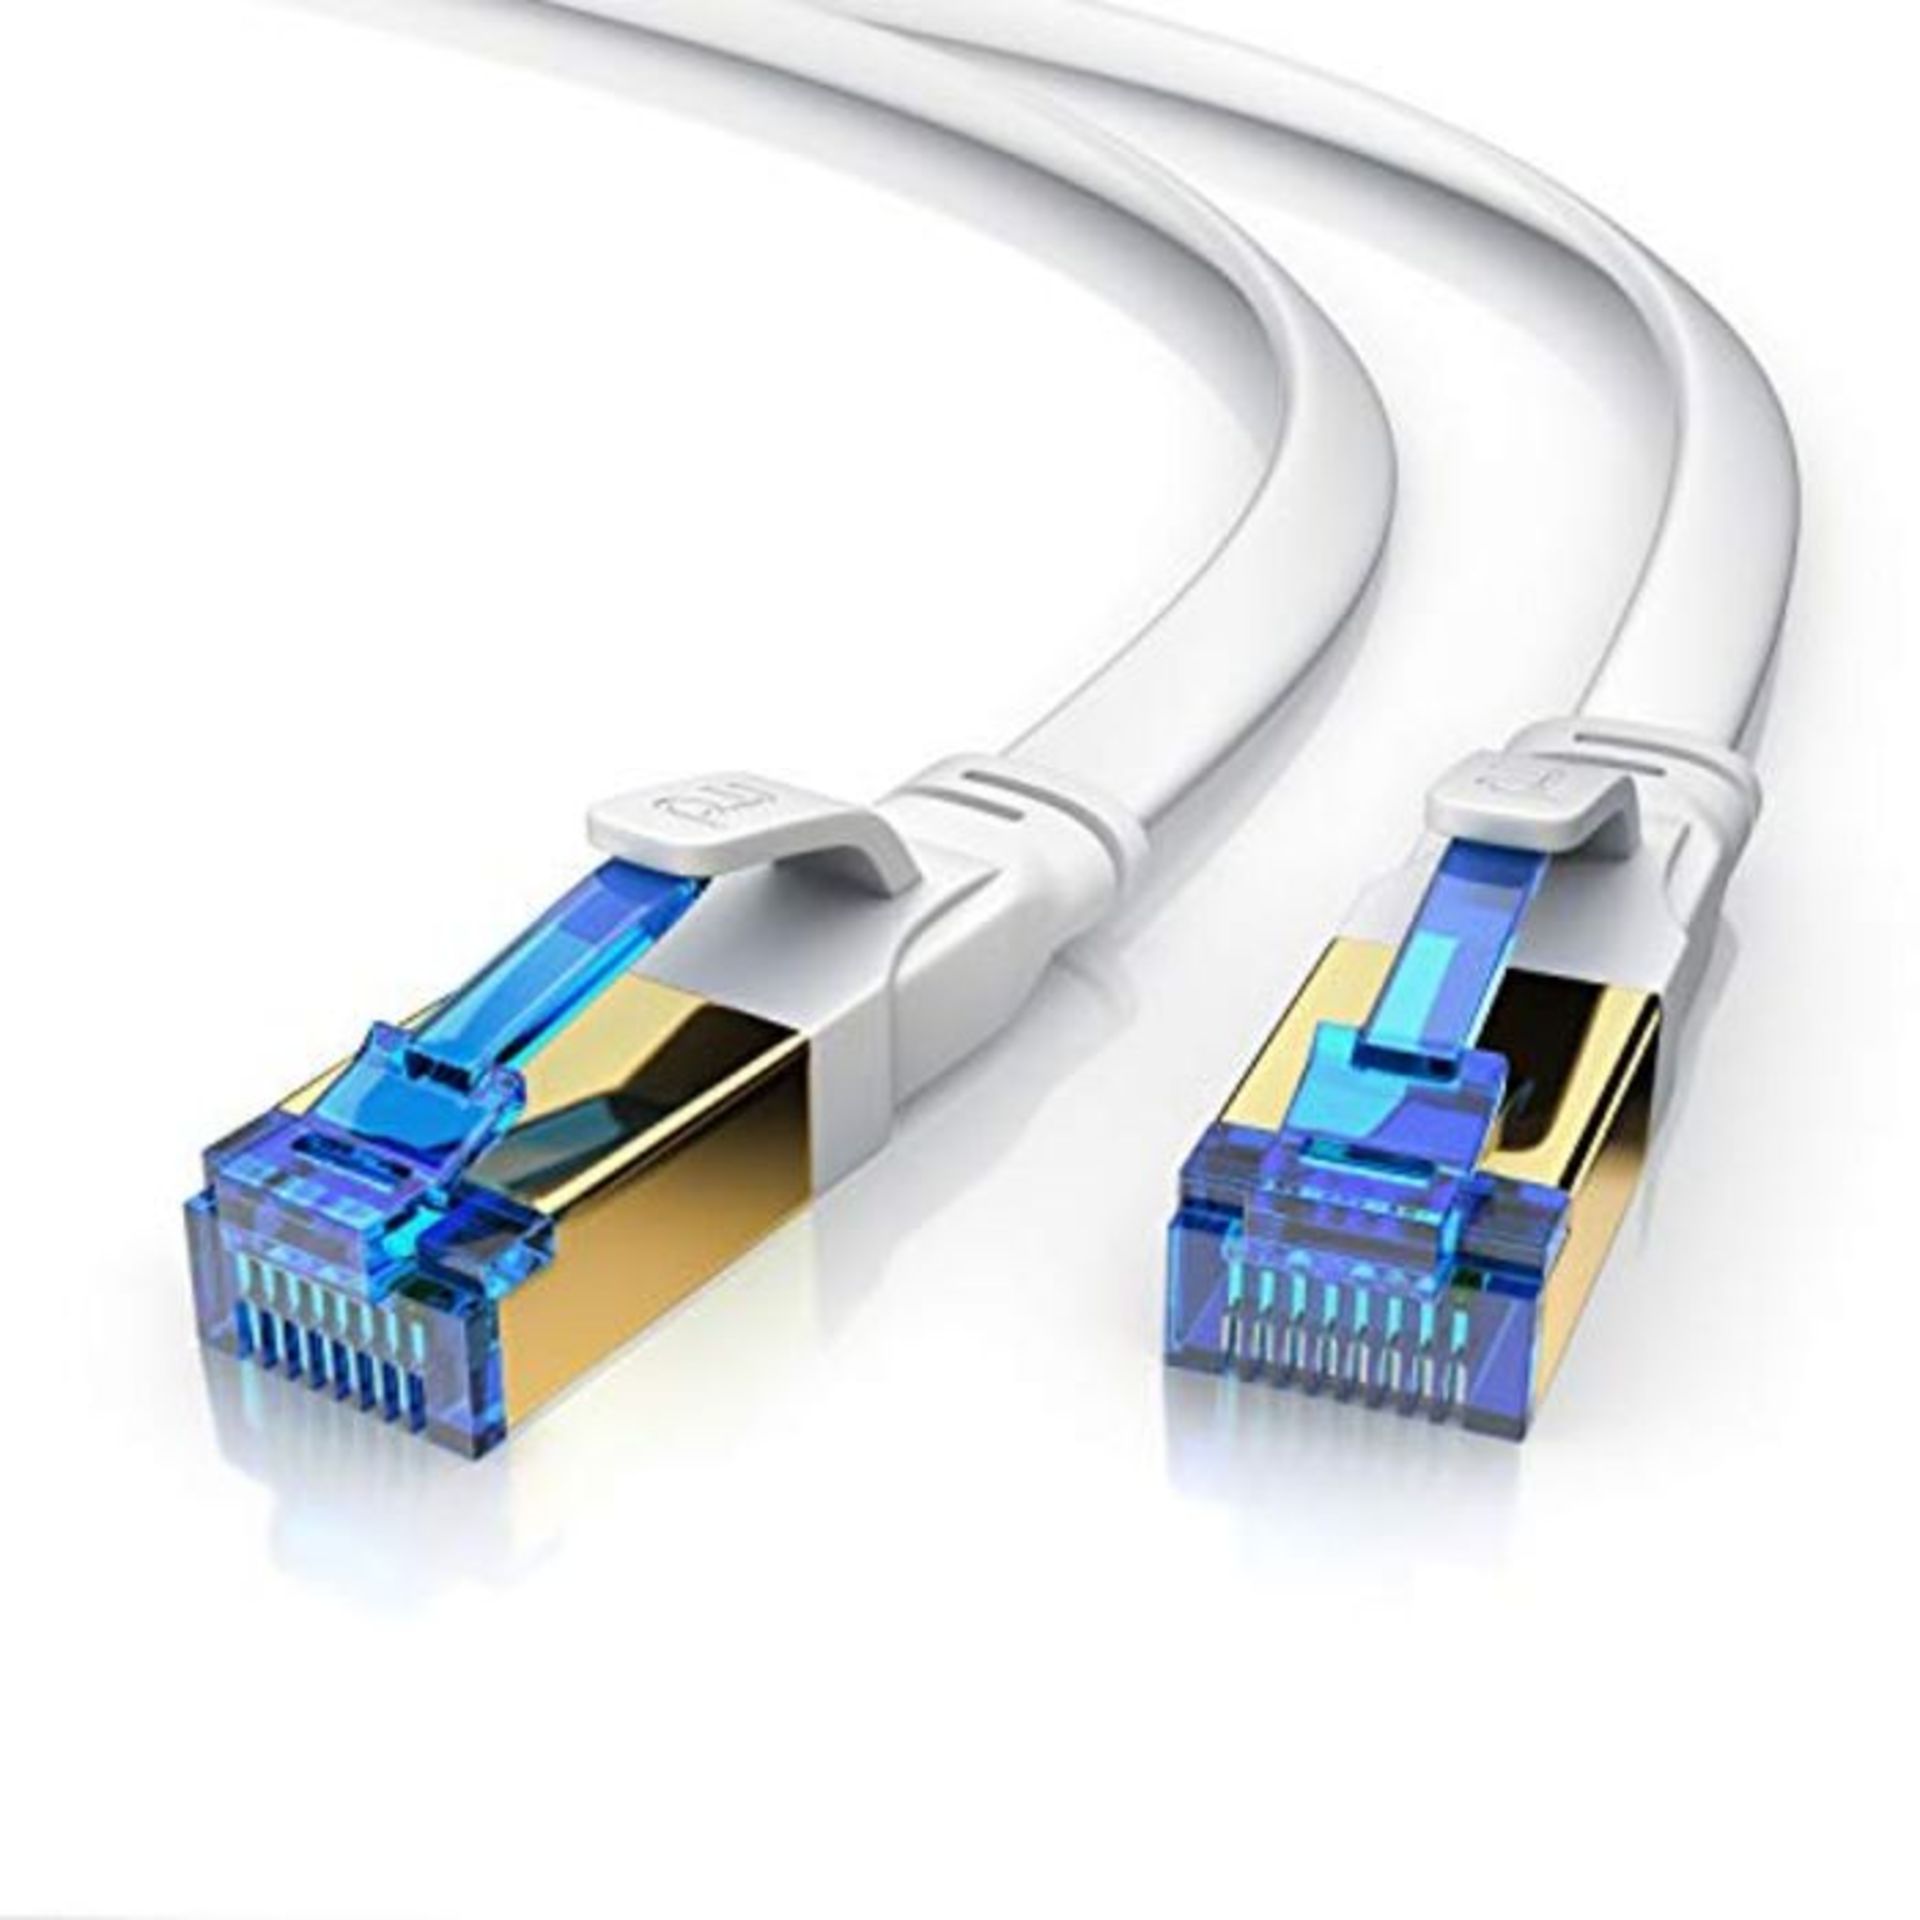 CSL CAT.8 Network Cable Flat 40 Gbits - LAN Cable Patch Cable - CAT 8 High Speed Gigab